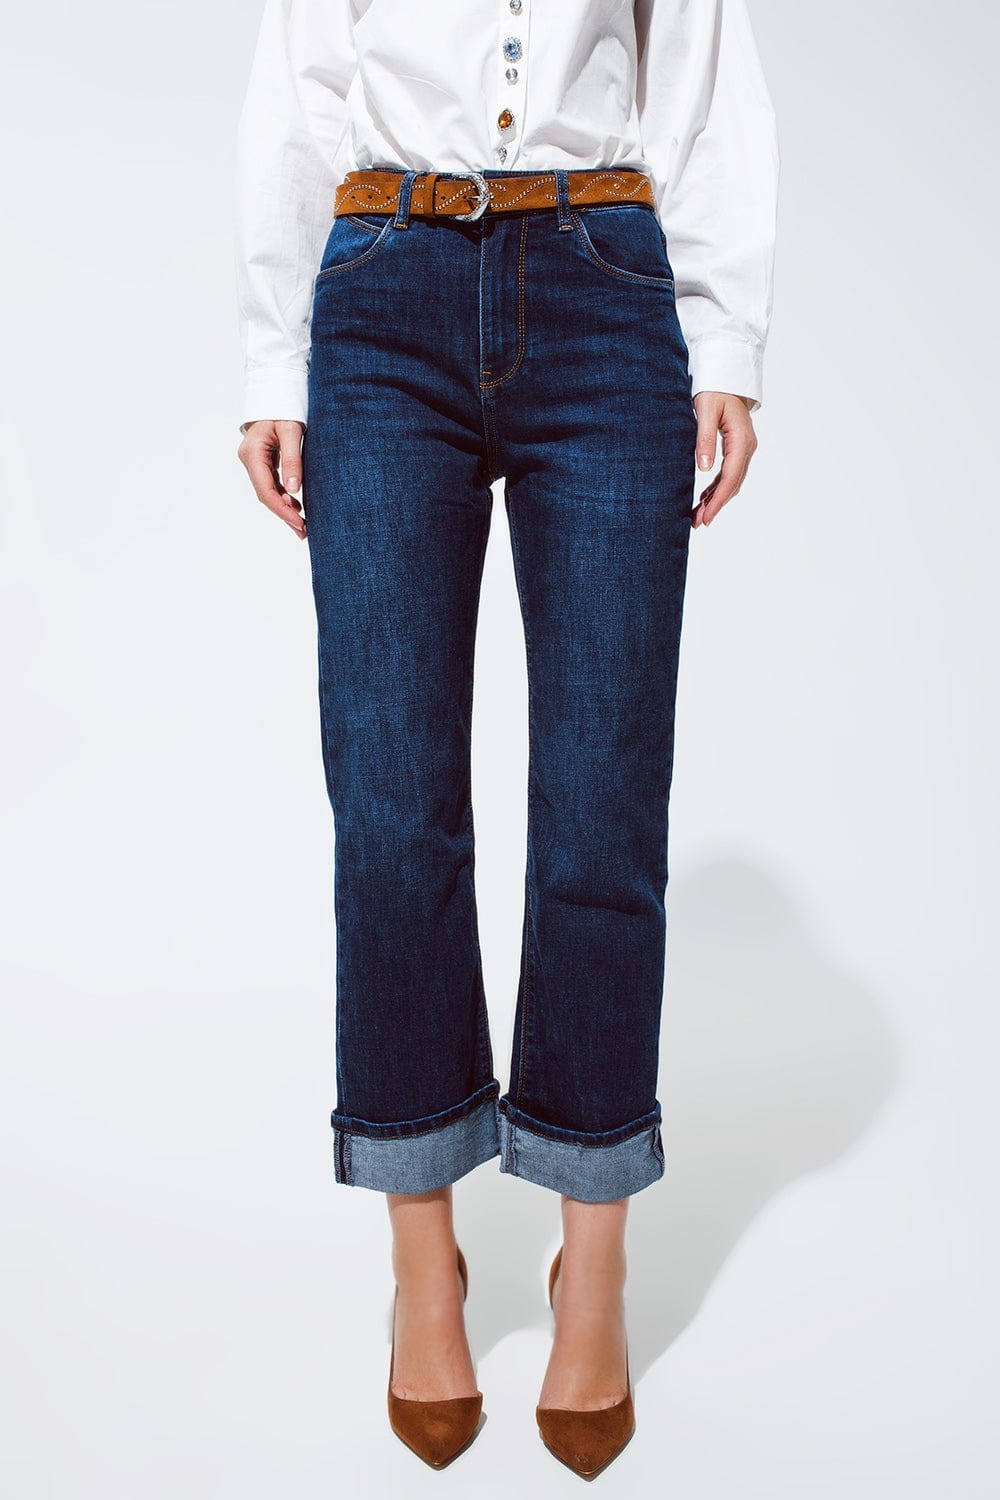 Q2 Women's Jean Relaxed Fit Blue Jeans With Cuffed Hem Detail